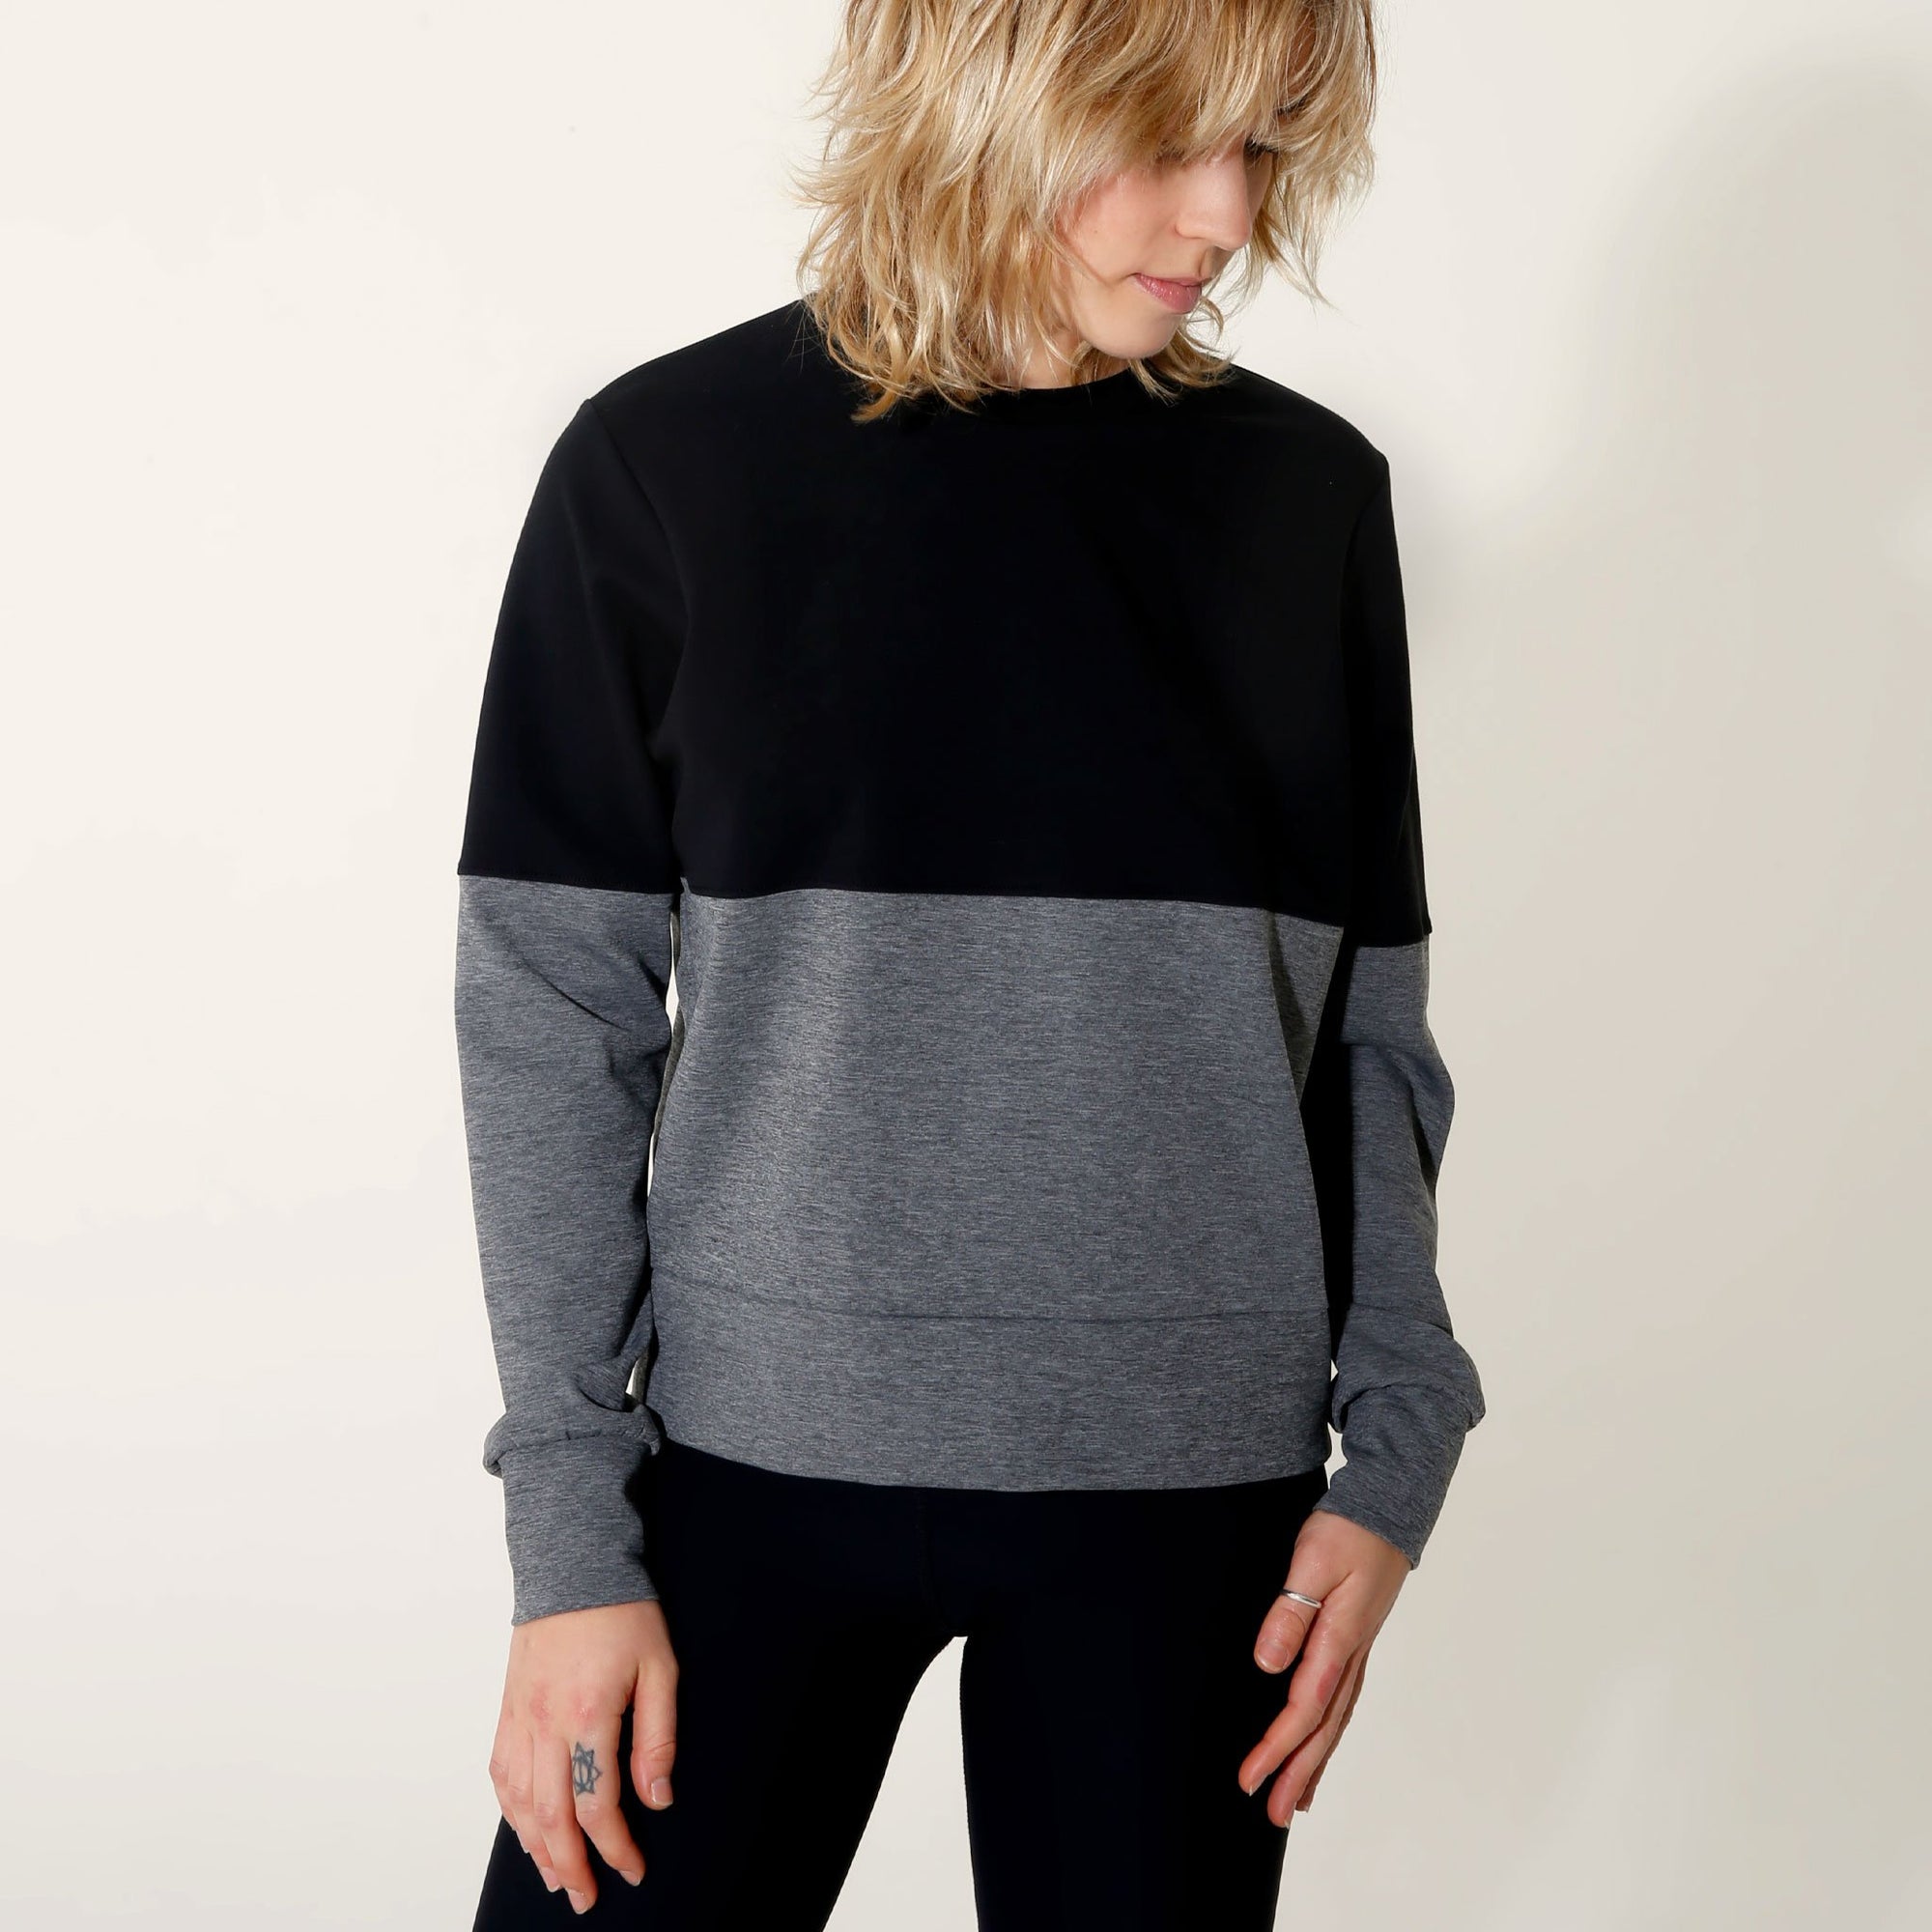 Two Tone Crewneck by _AS YOU ARE